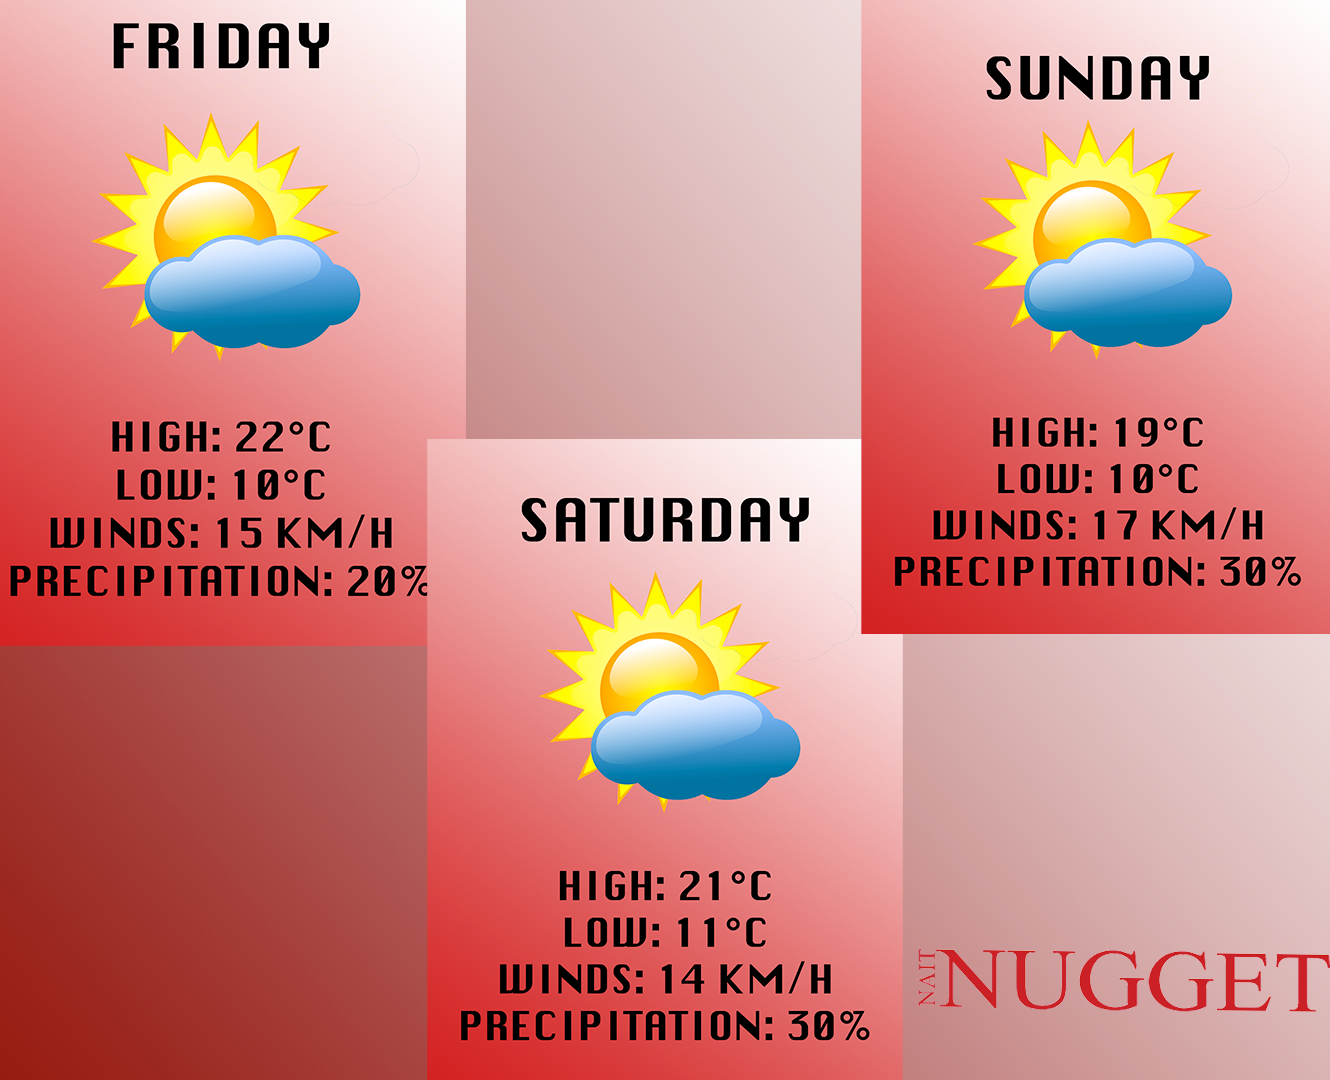 Weather for the weekend